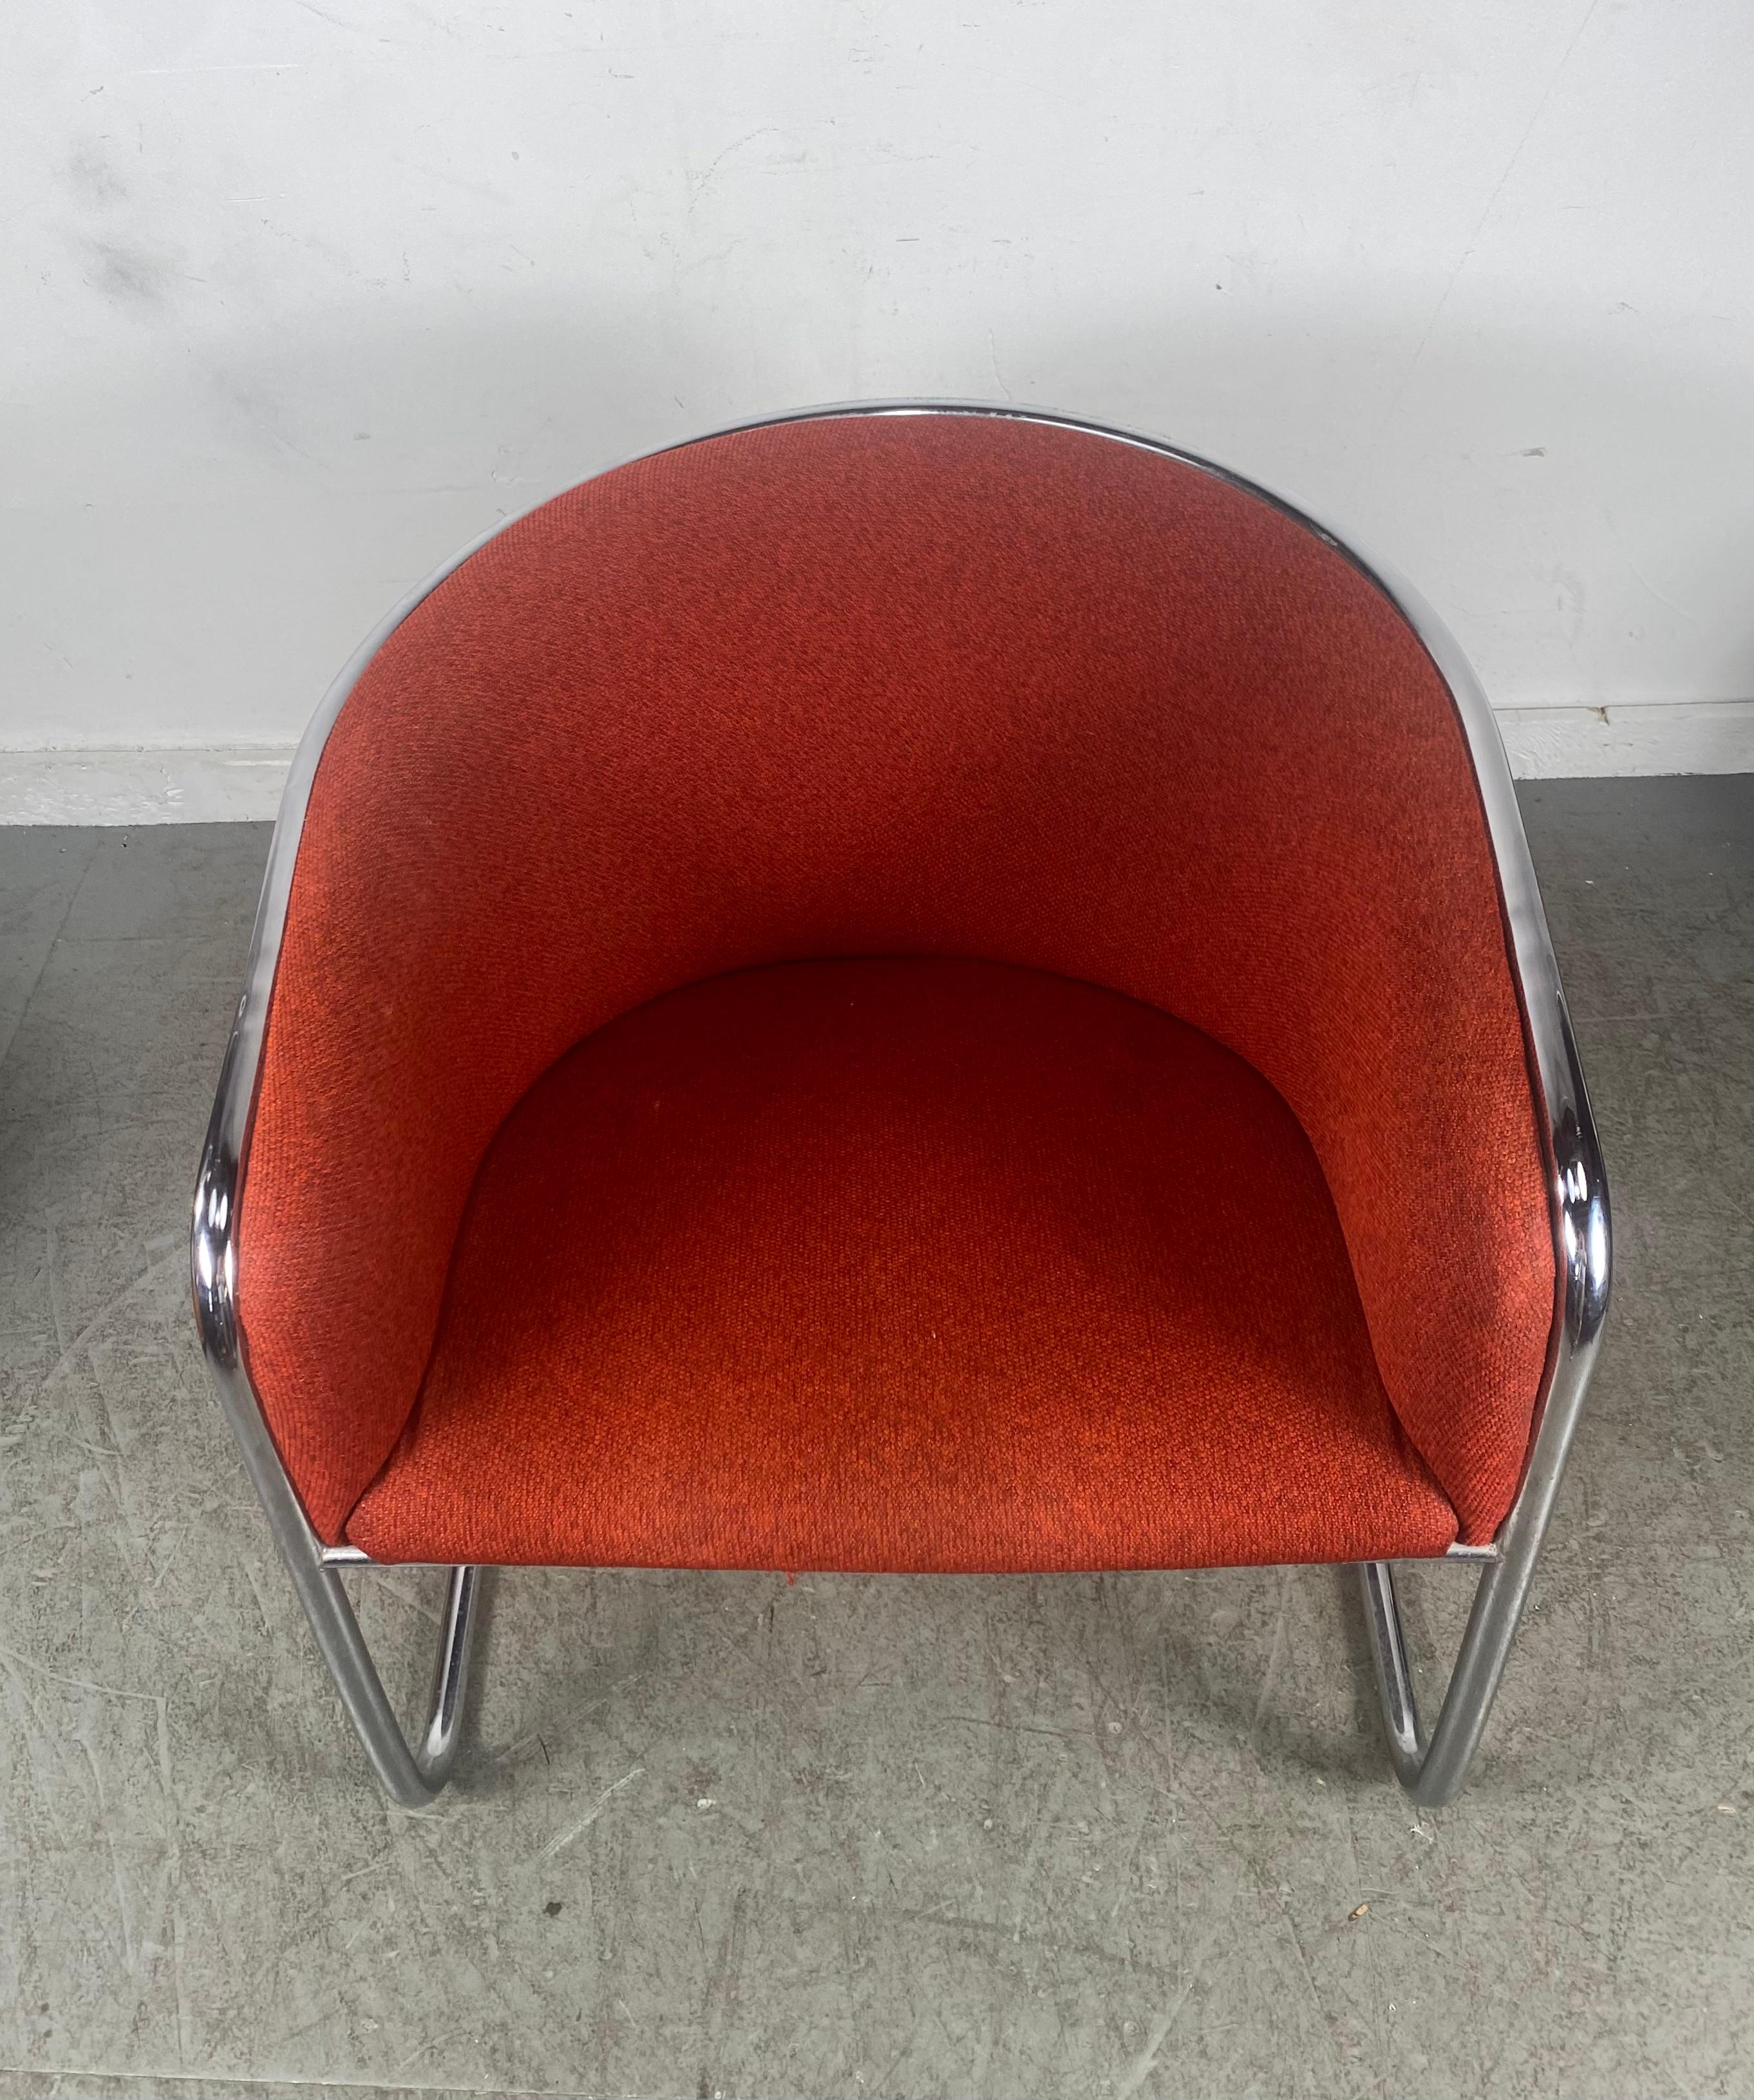  Cantilevered Chrome Club Tub Chair by Burgasser & Anton Lorenz for Thonet In Good Condition For Sale In Buffalo, NY